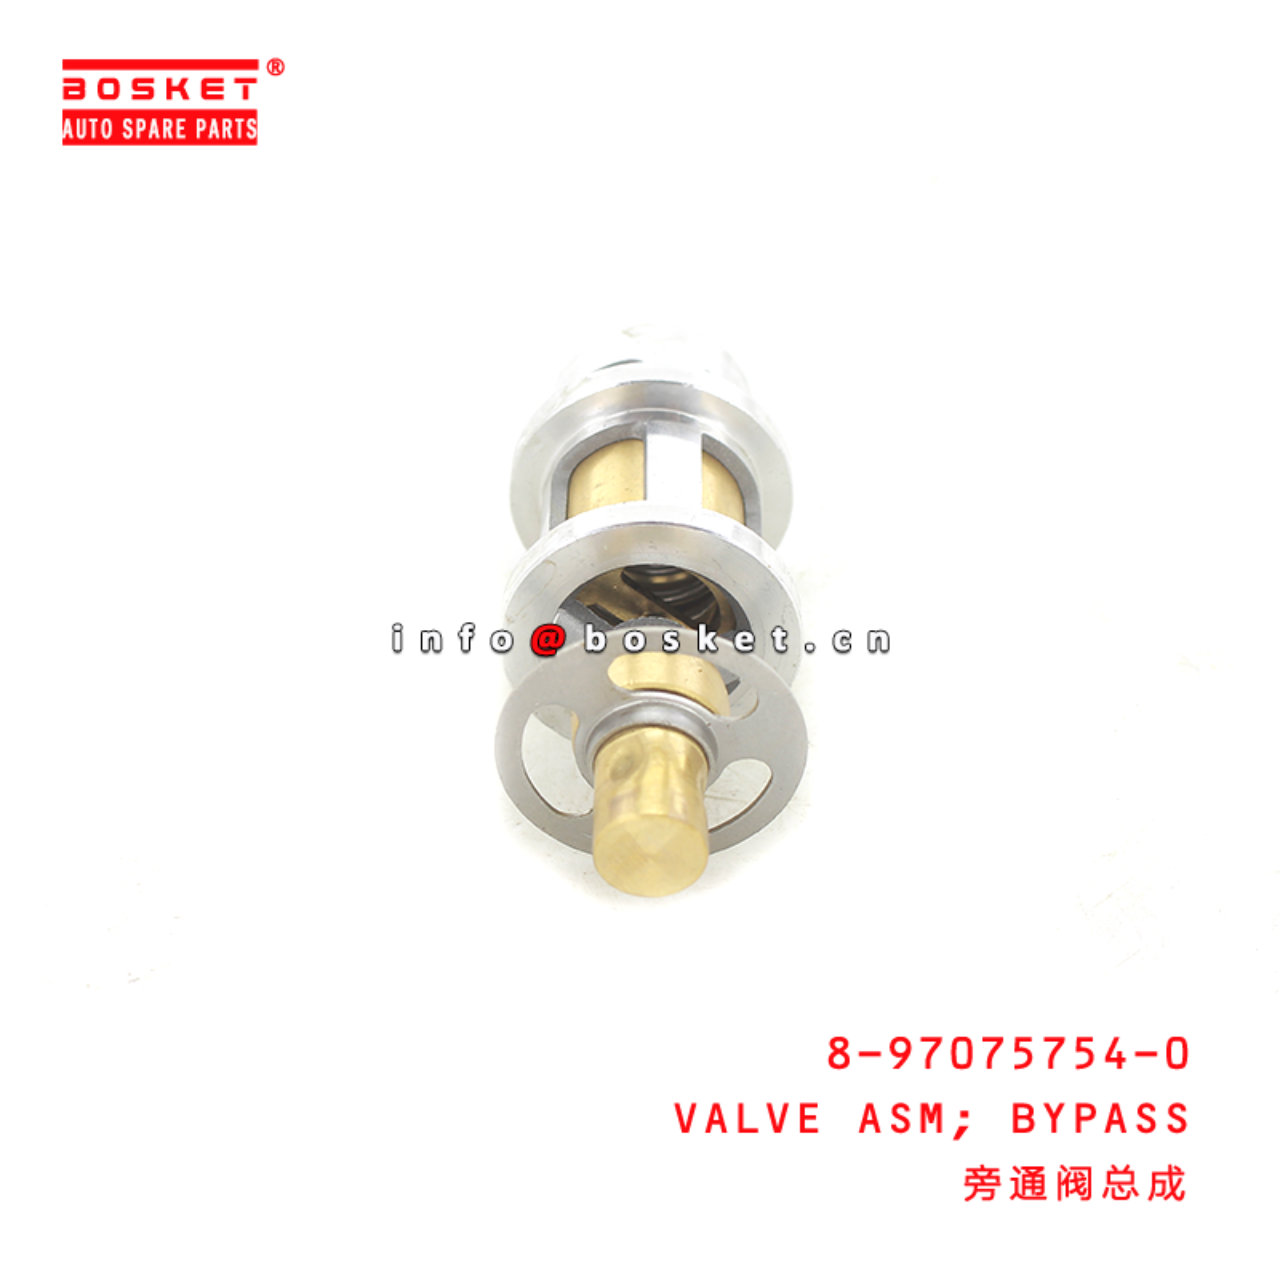 8-97075754-0 Bypass Valve Assembly Suitable for ISUZU NKNP 8970757540